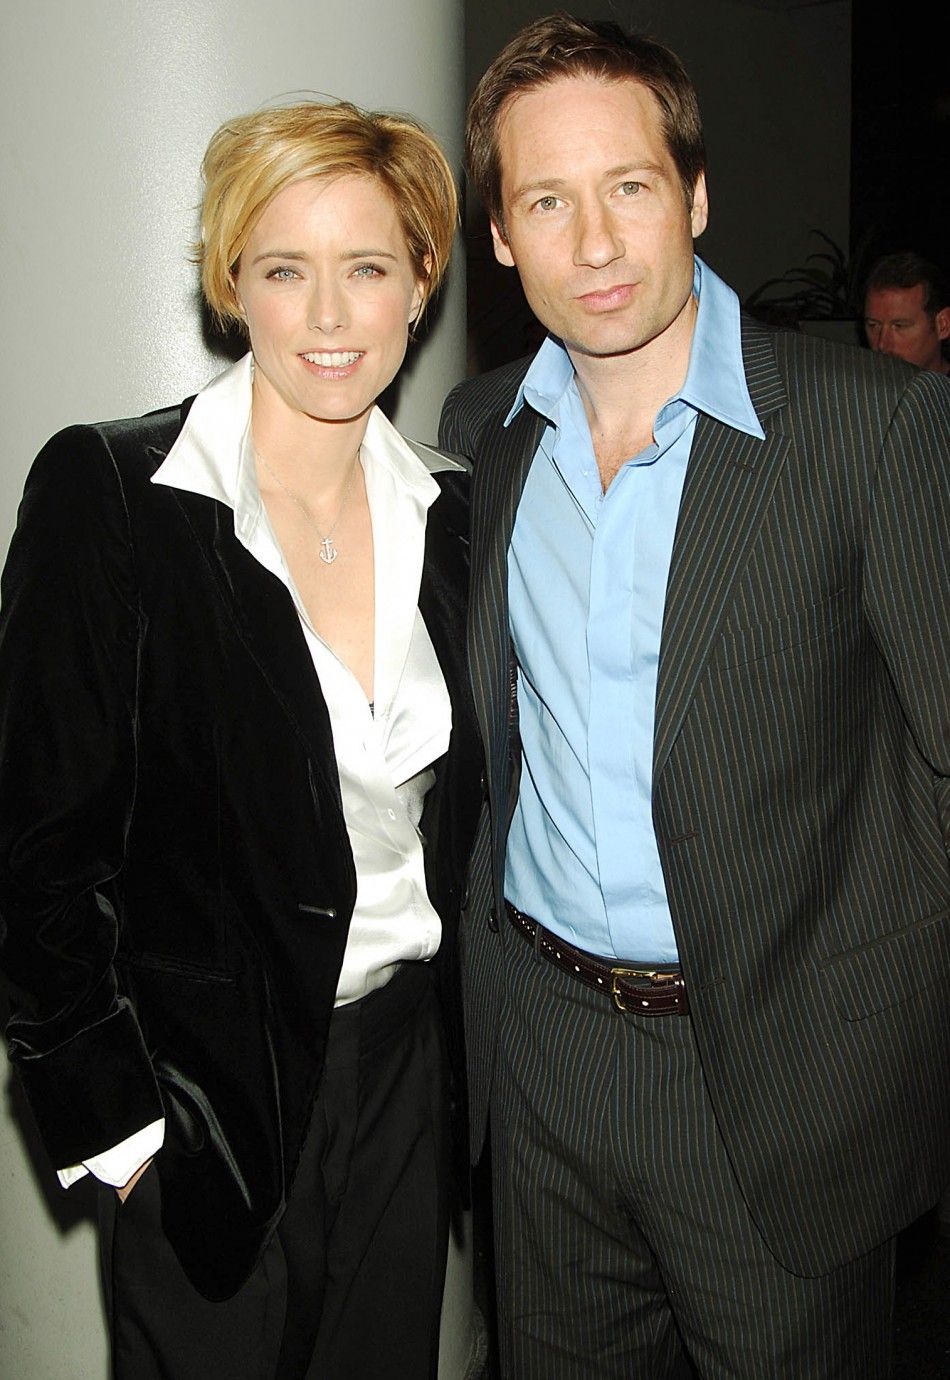 Actors David Duchovny and Tea Leoni pose for photographers during the premiere of their film quotHouse of Dquot in New York April 10, 2005.